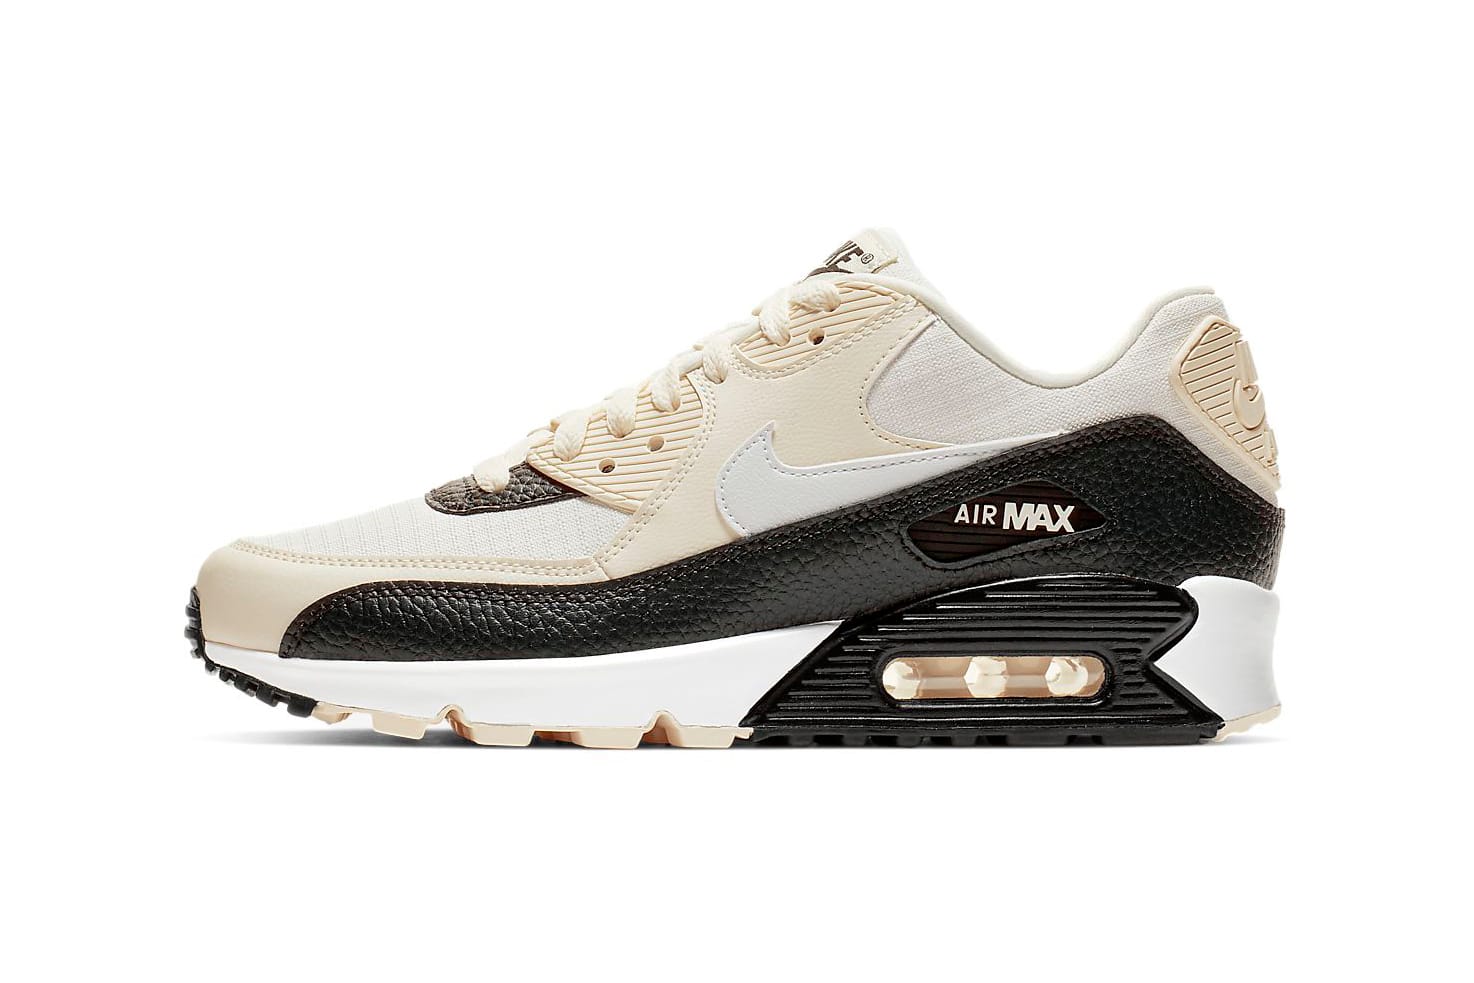 Nike Air Max 90 in Ivory, Black and Oil 